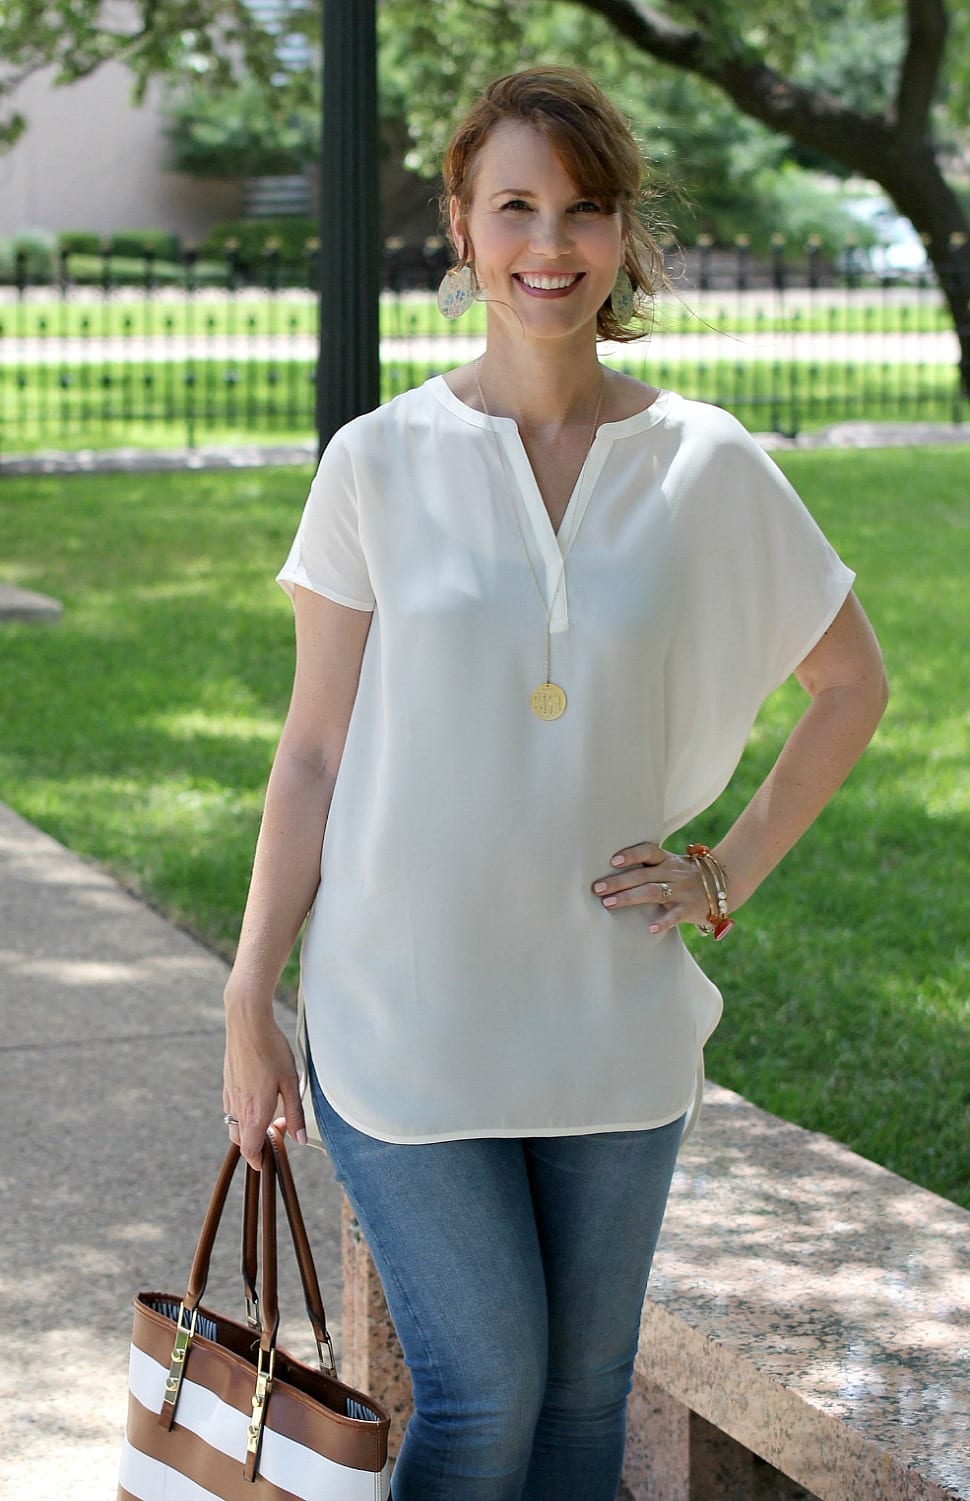 I love tunic tops and they make putting together an outfit I feel good in so easy. This classic tunic from J. Jill is paired with light denim, nude peep toe booties and a striped tote bag.